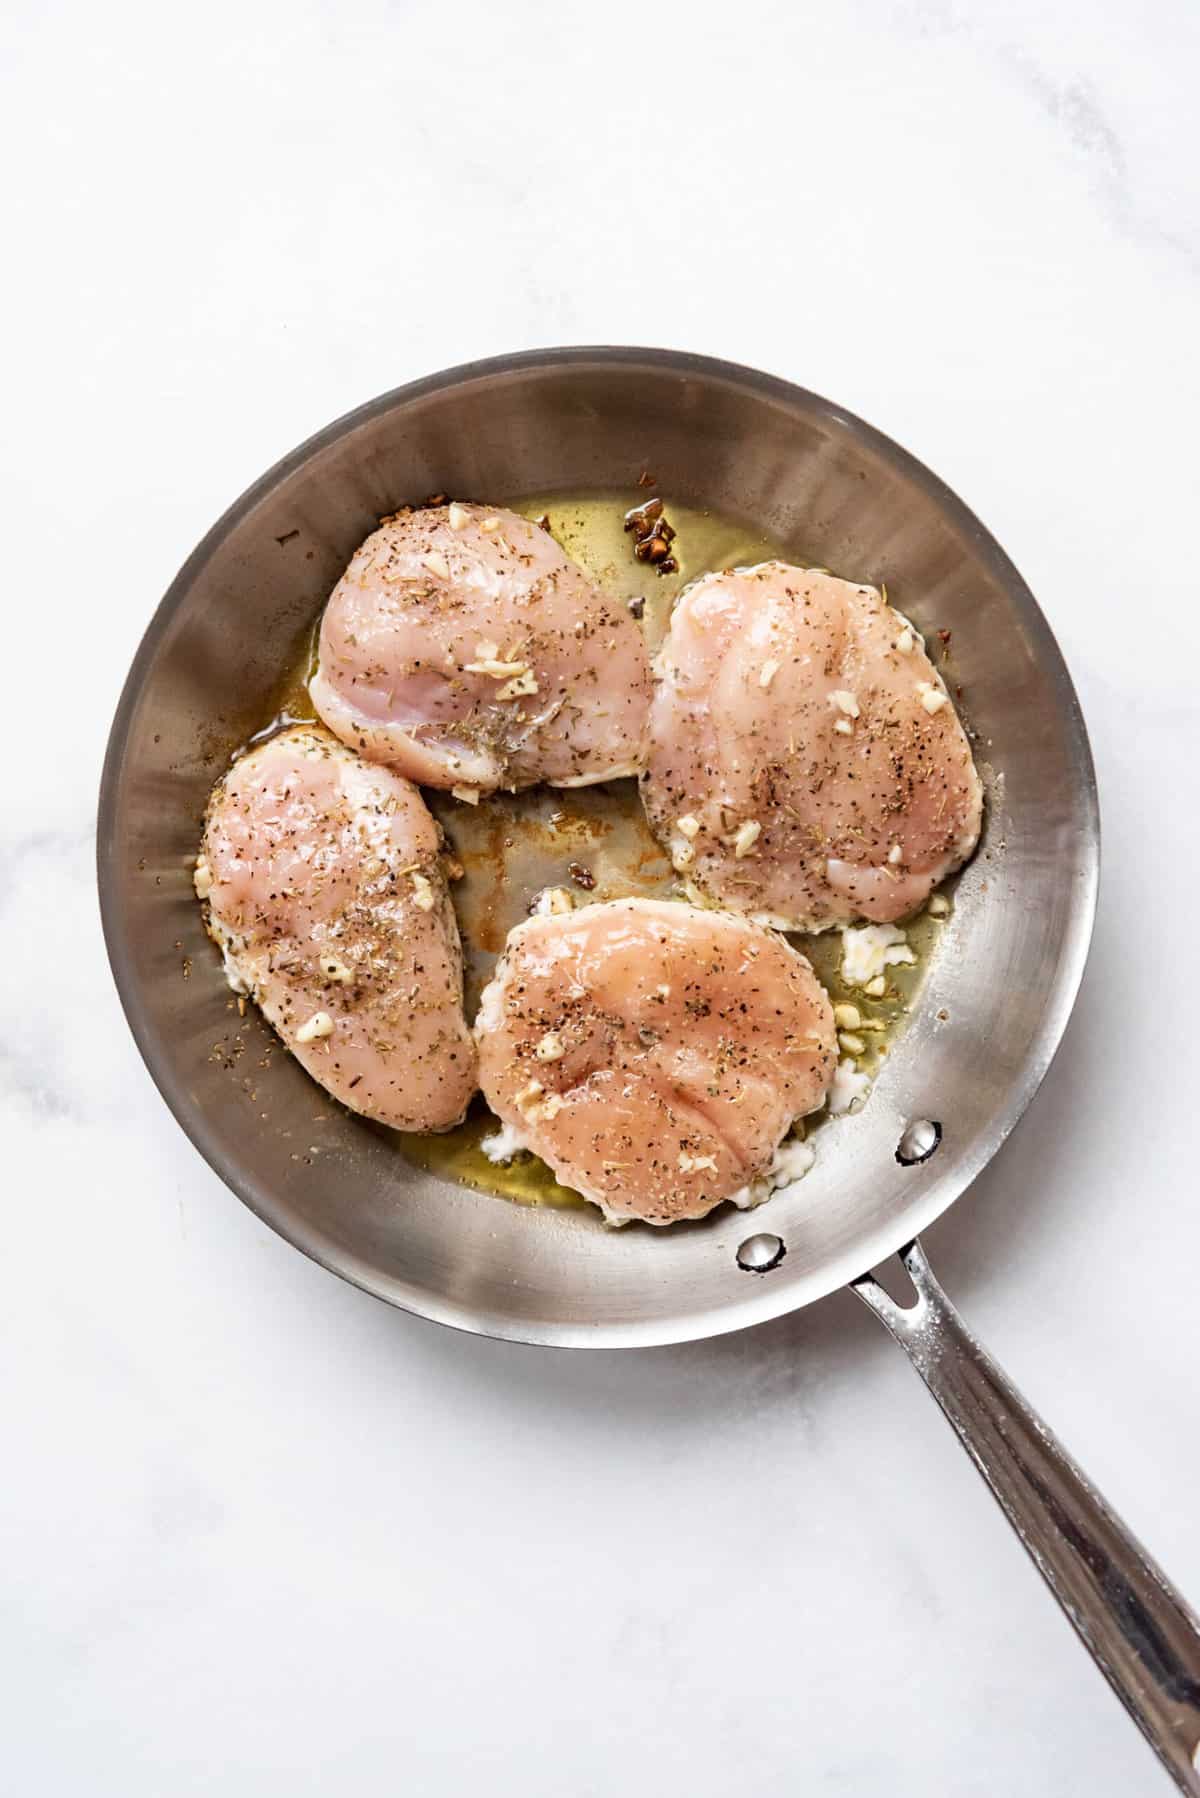 Four boneless skinless chicken breasts in a pan with hot oil.